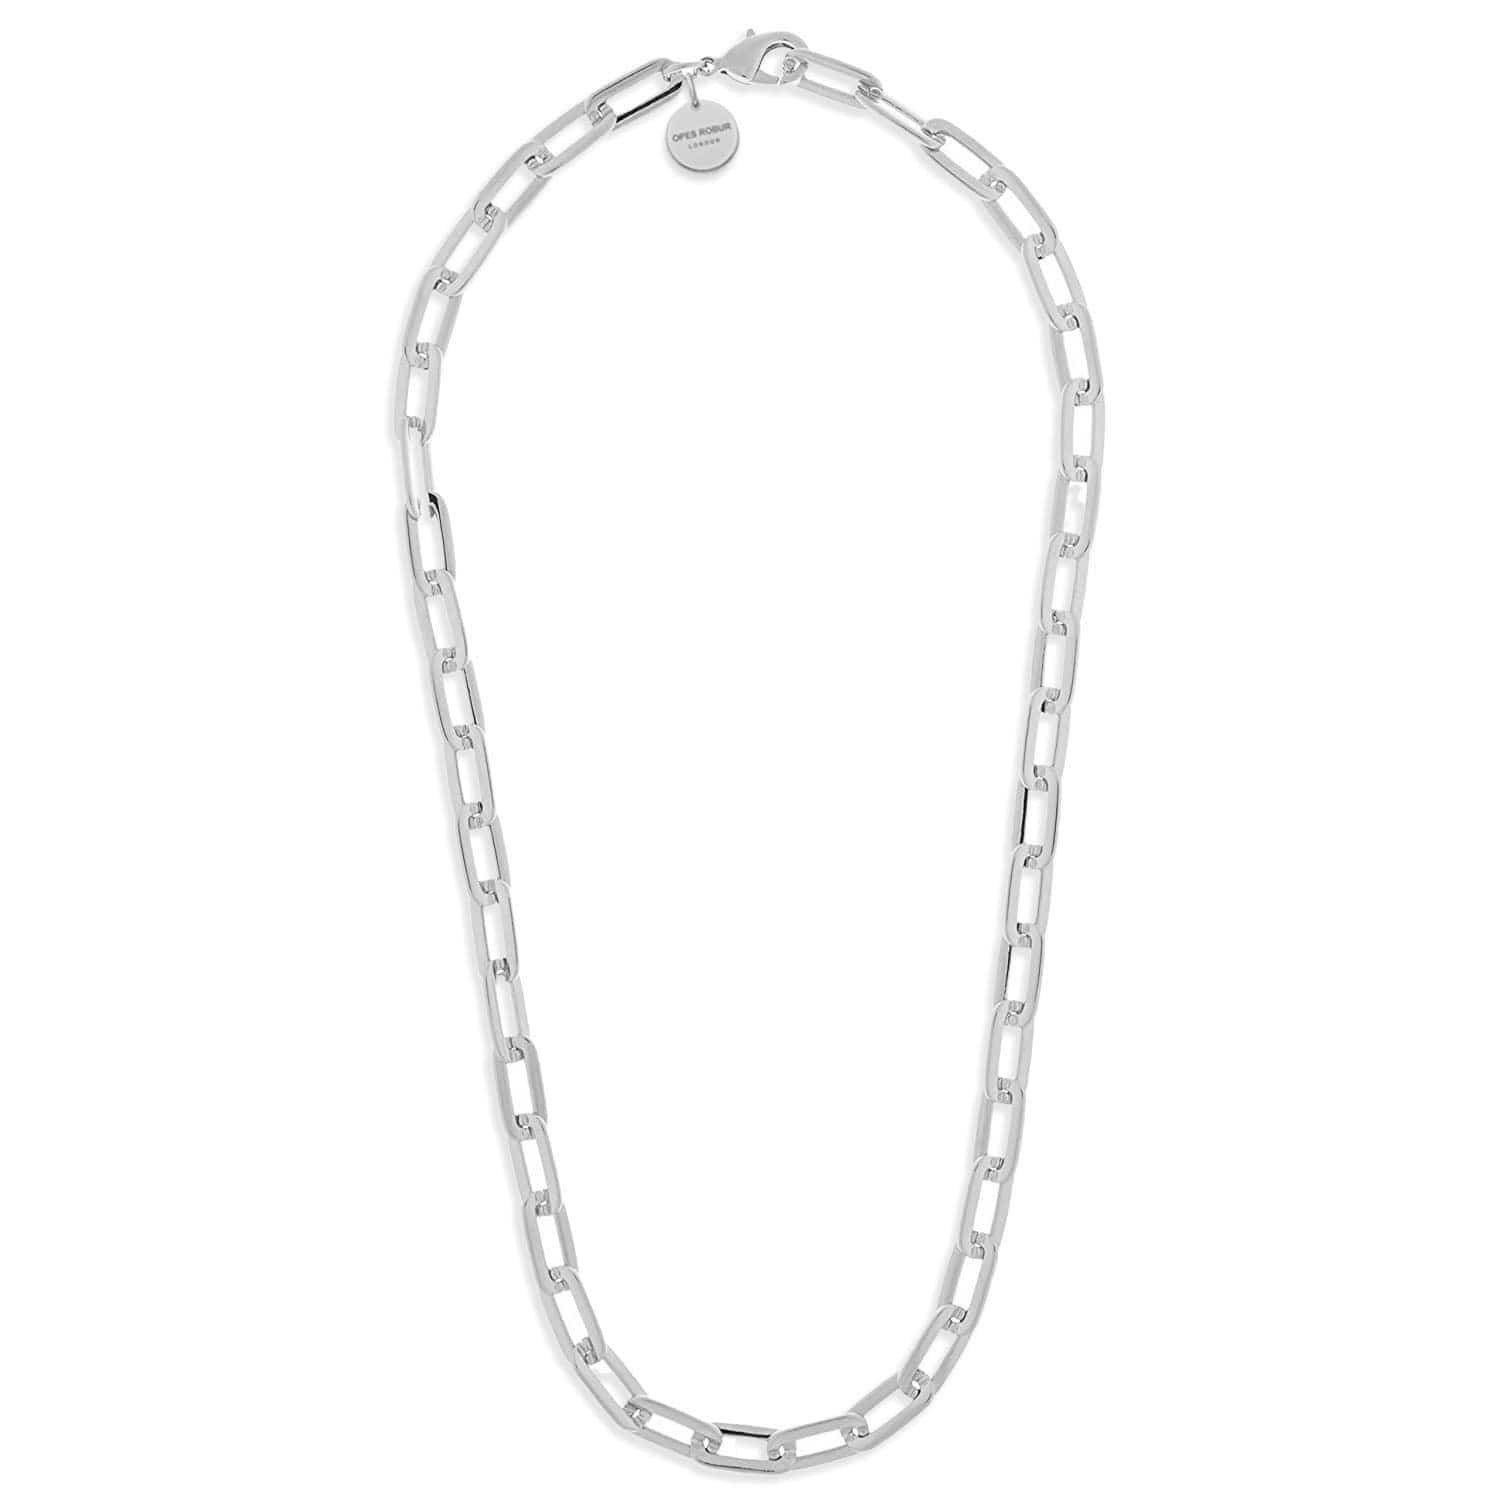 Opes Robur LONG LINK - SILVER